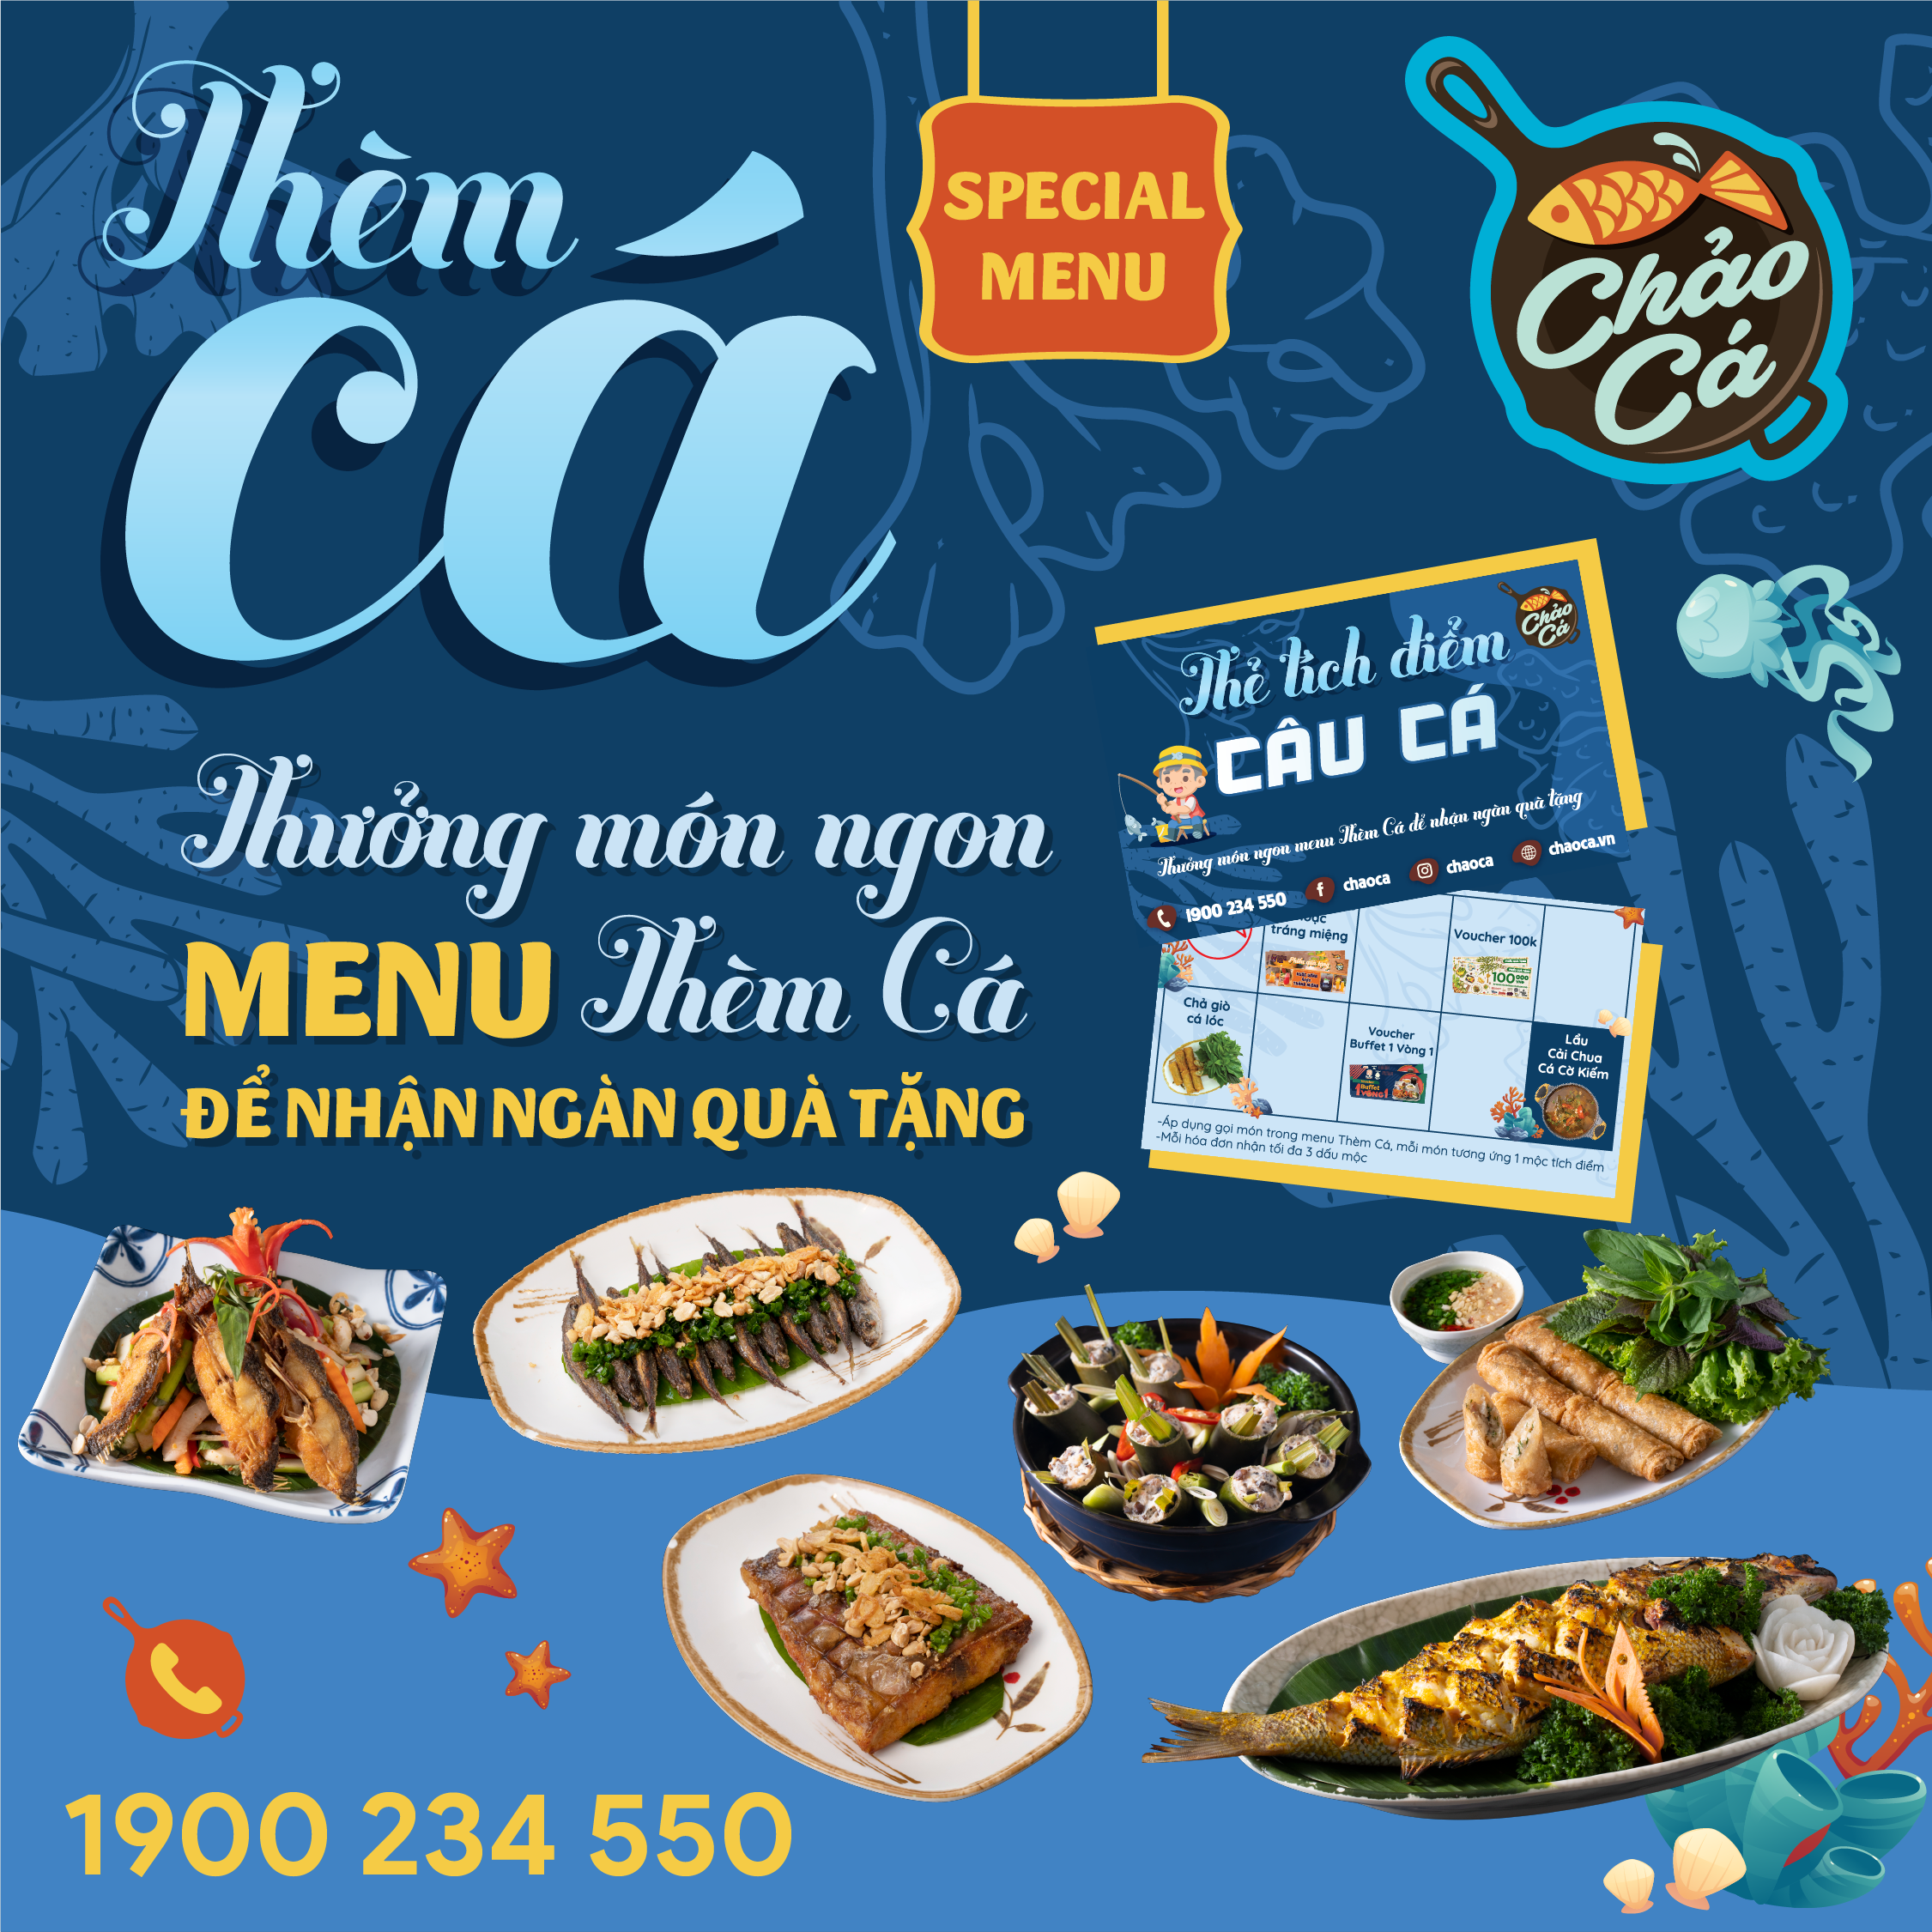 💥 CHAO CA LAUNCHES A NEW MENU - THEM CA WITH 11 AMAZING DISHES